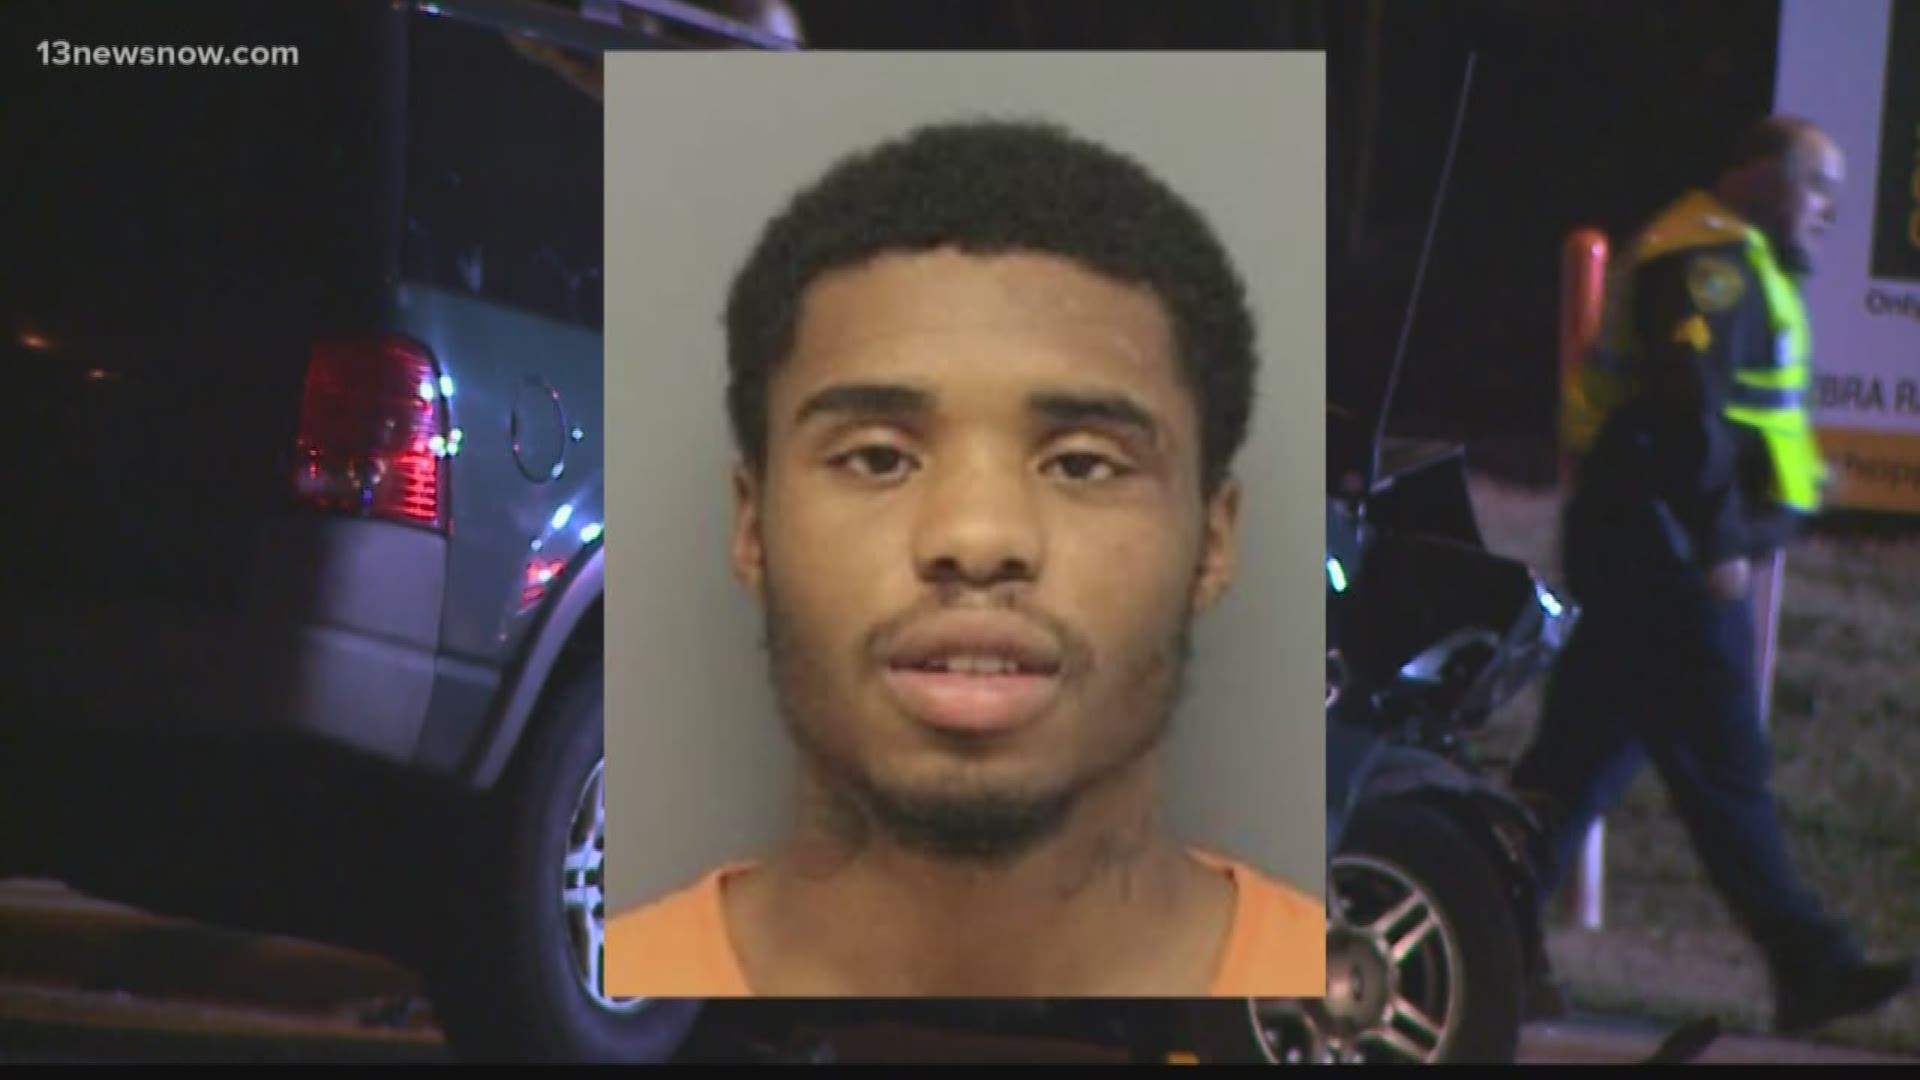 The manhunt continues for 19-year-old Darrell Pittman who fled police after being involved in a deadly crash.